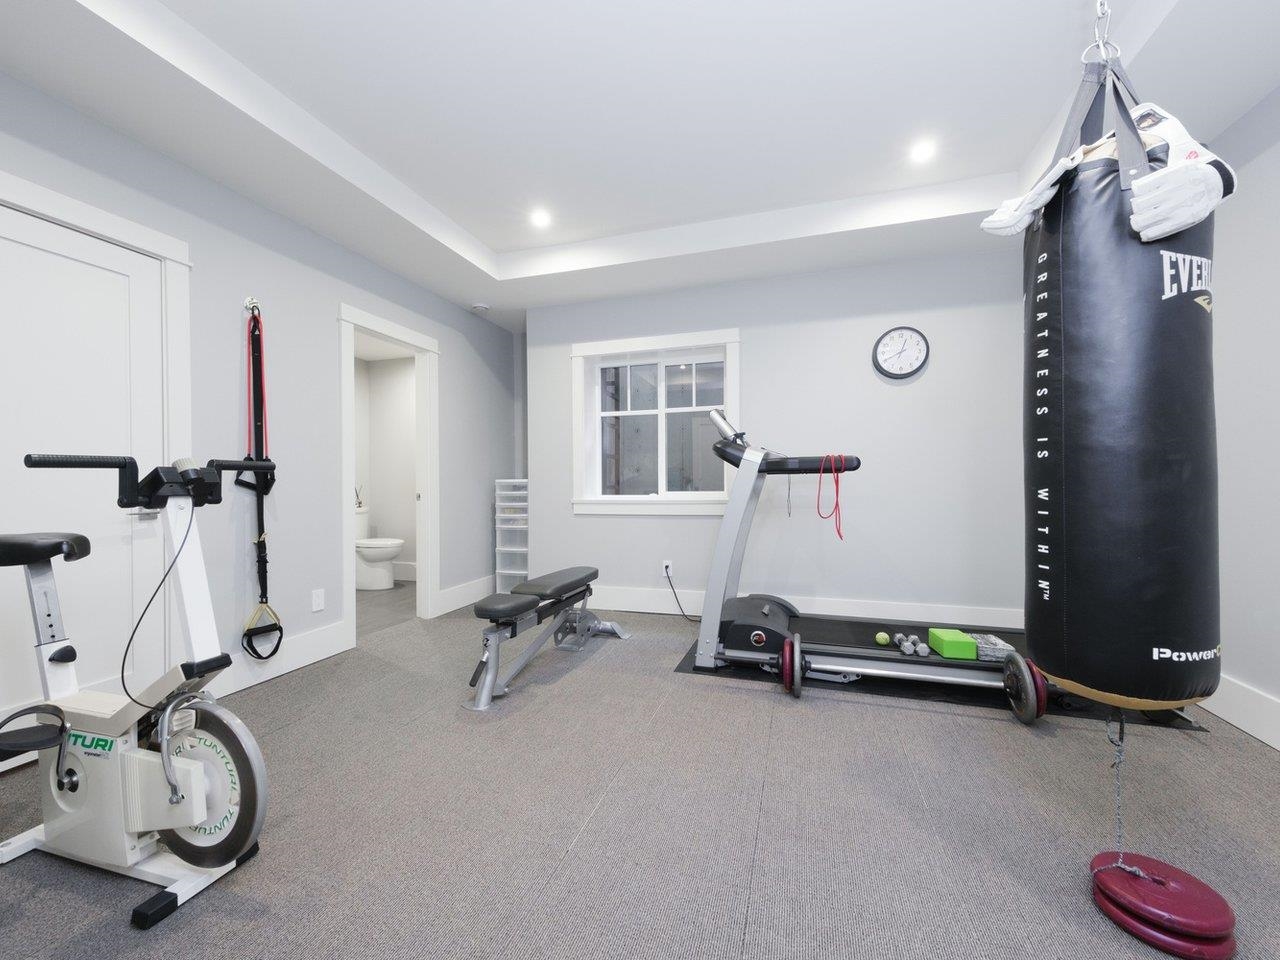 Currently used as a gym but can be a bedroom as it has a closet, window and 2 piece ensuite.